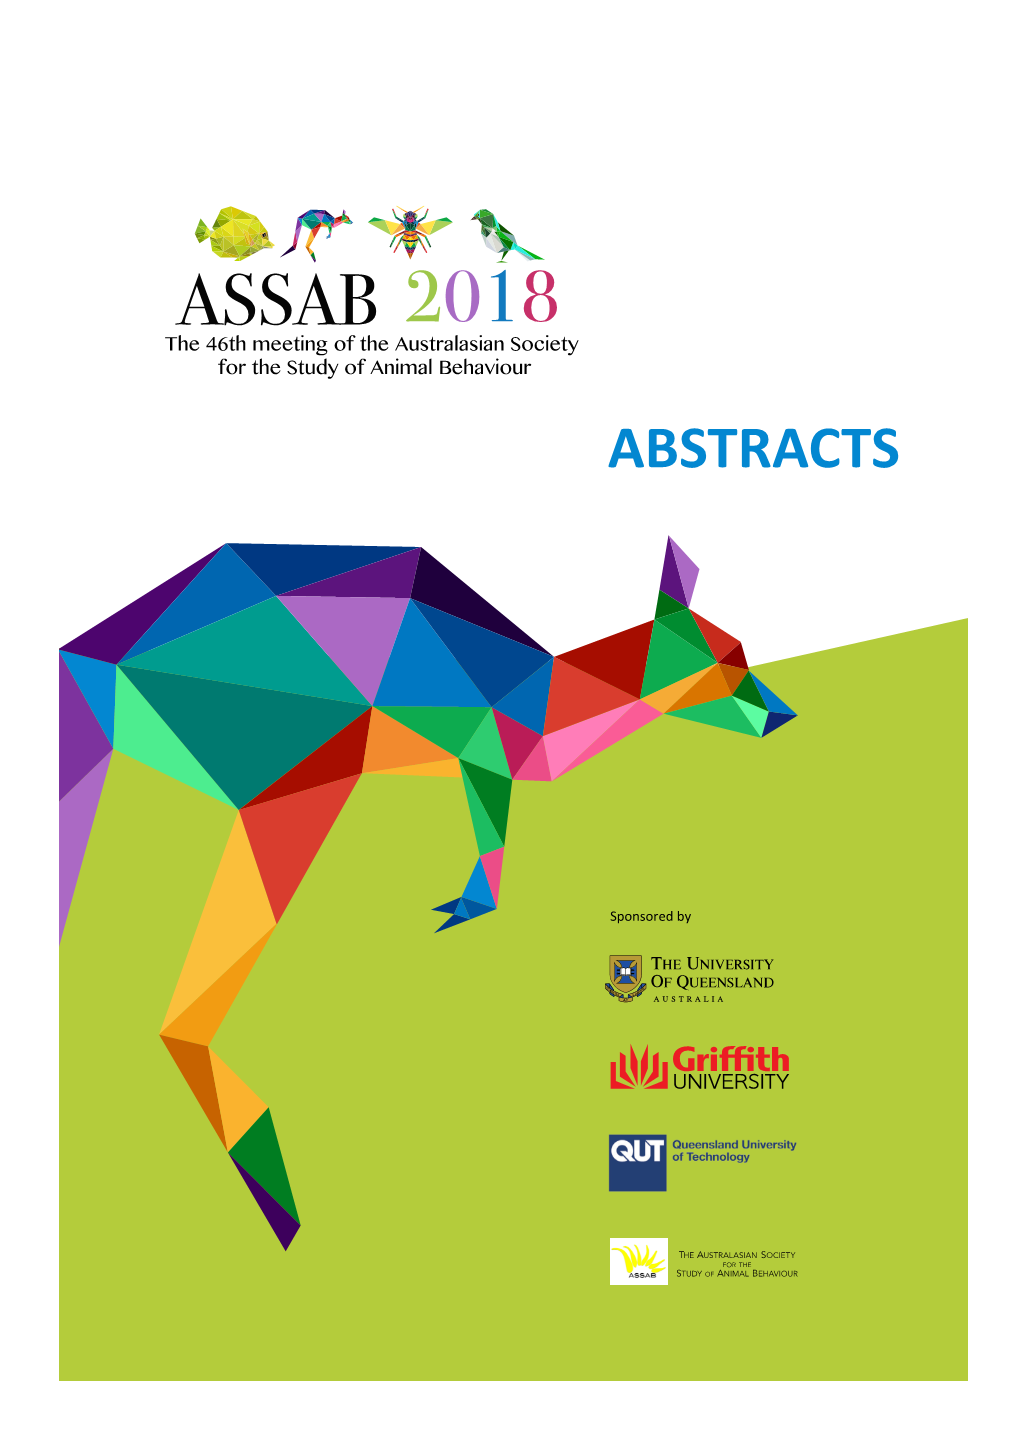 ASSAB 2018 Abstract Booklet